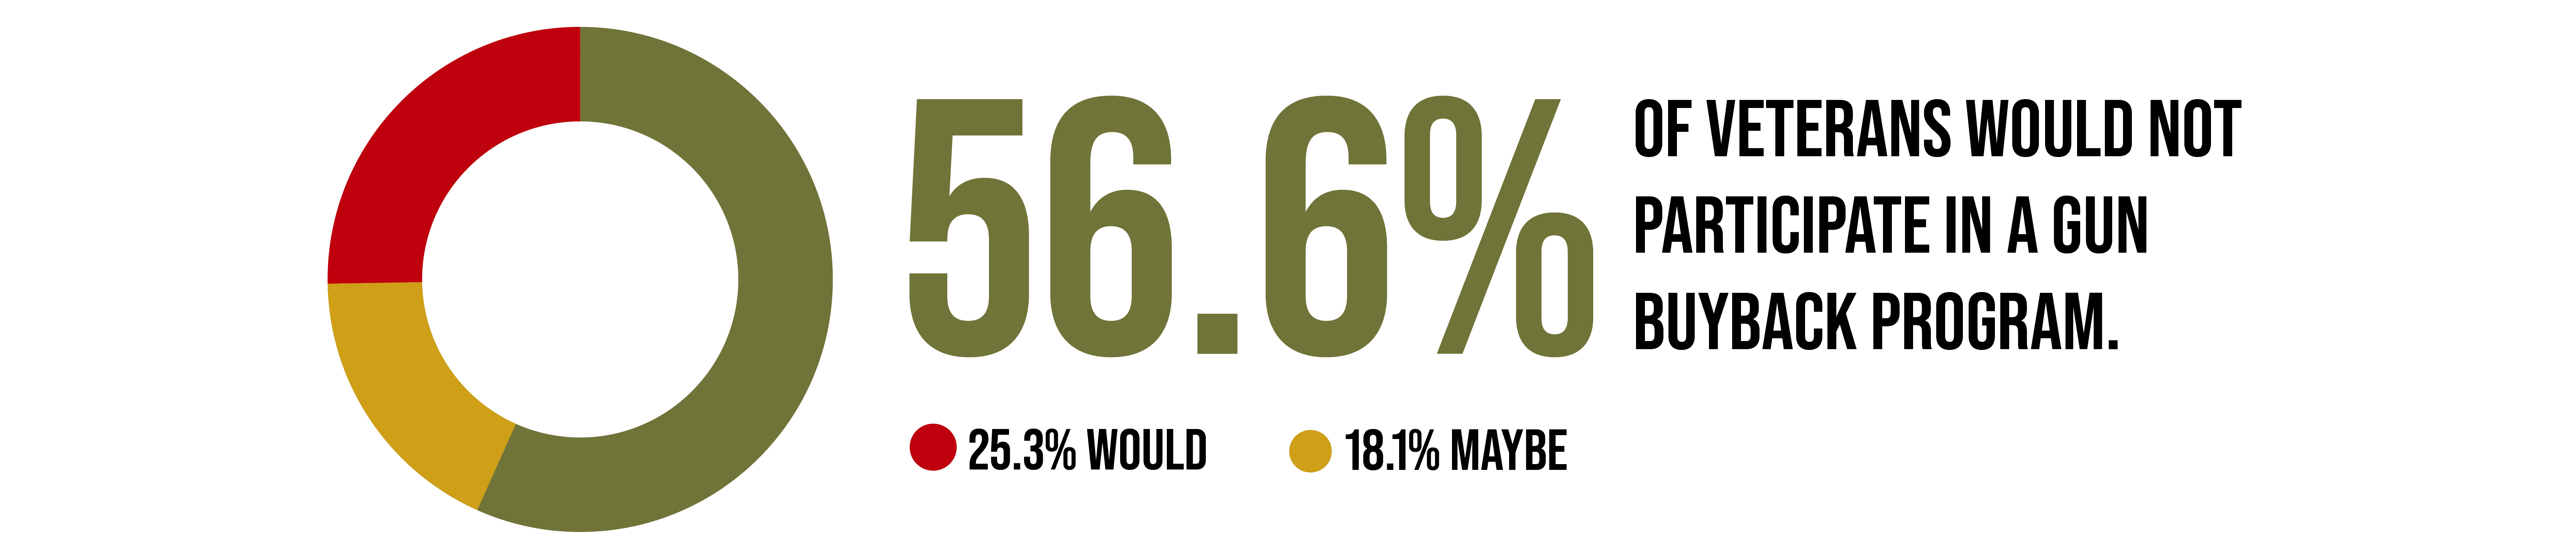 56.6% of Veterans Would Not Participate in a Gun Buyback Program